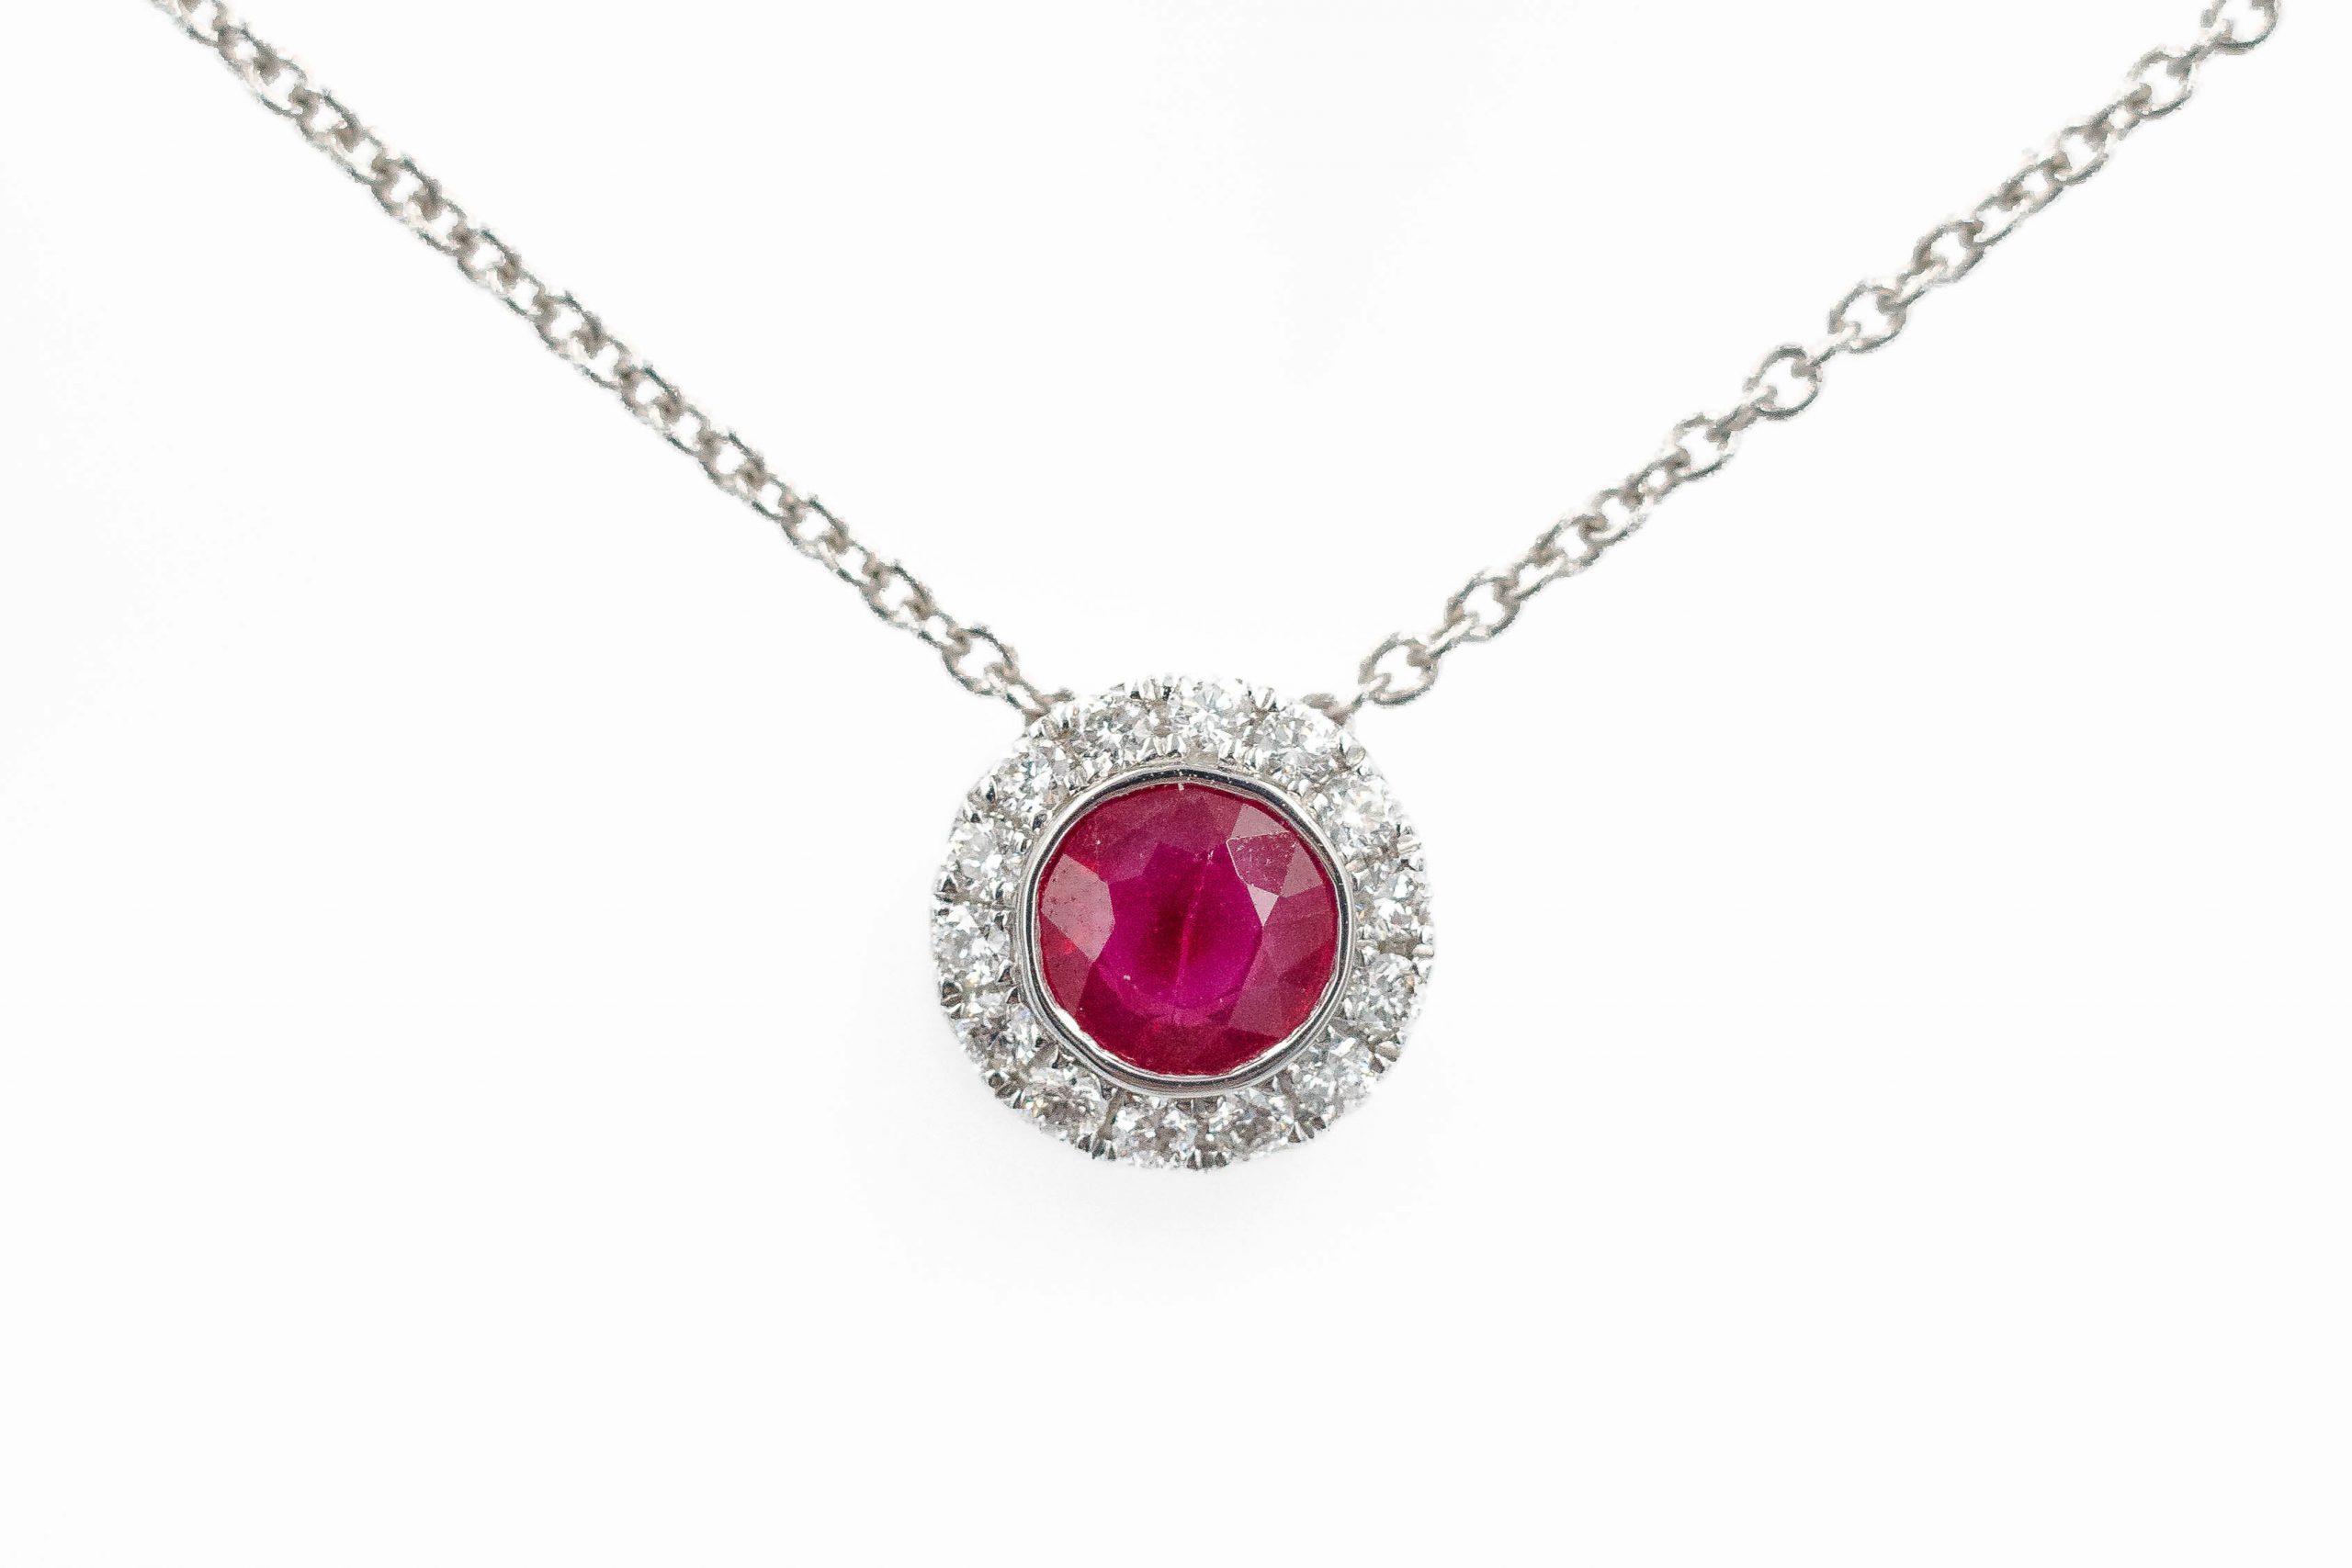 Ruby and Diamond Halo Slider Necklace